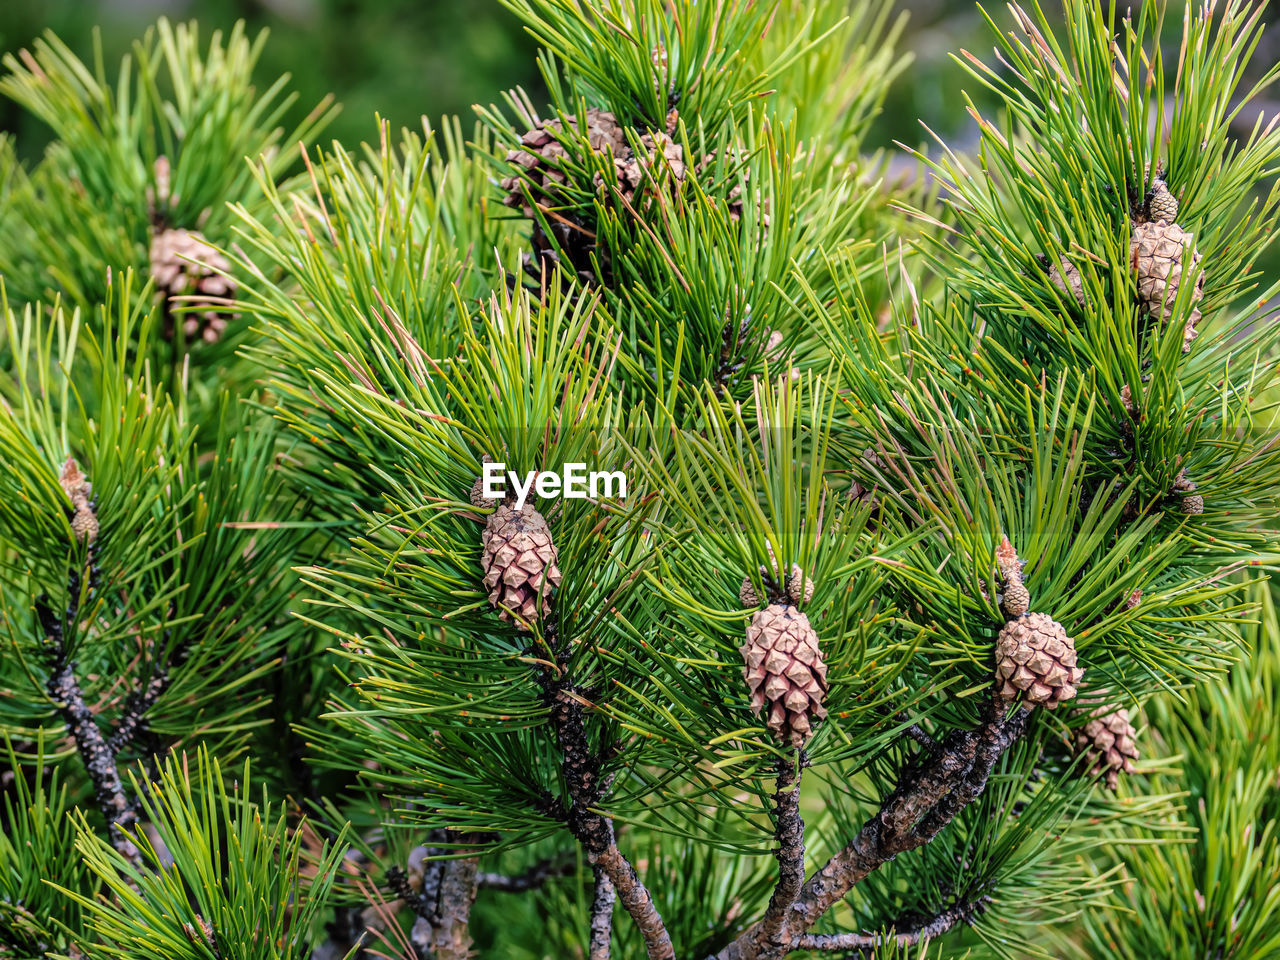 tree, plant, green, coniferous tree, pine tree, nature, fir, spruce, pinaceae, growth, pine, evergreen, beauty in nature, no people, branch, pine cone, day, needle - plant part, forest, leaf, outdoors, close-up, plant part, land, christmas tree, conifer cone, focus on foreground, tranquility, flower, botany